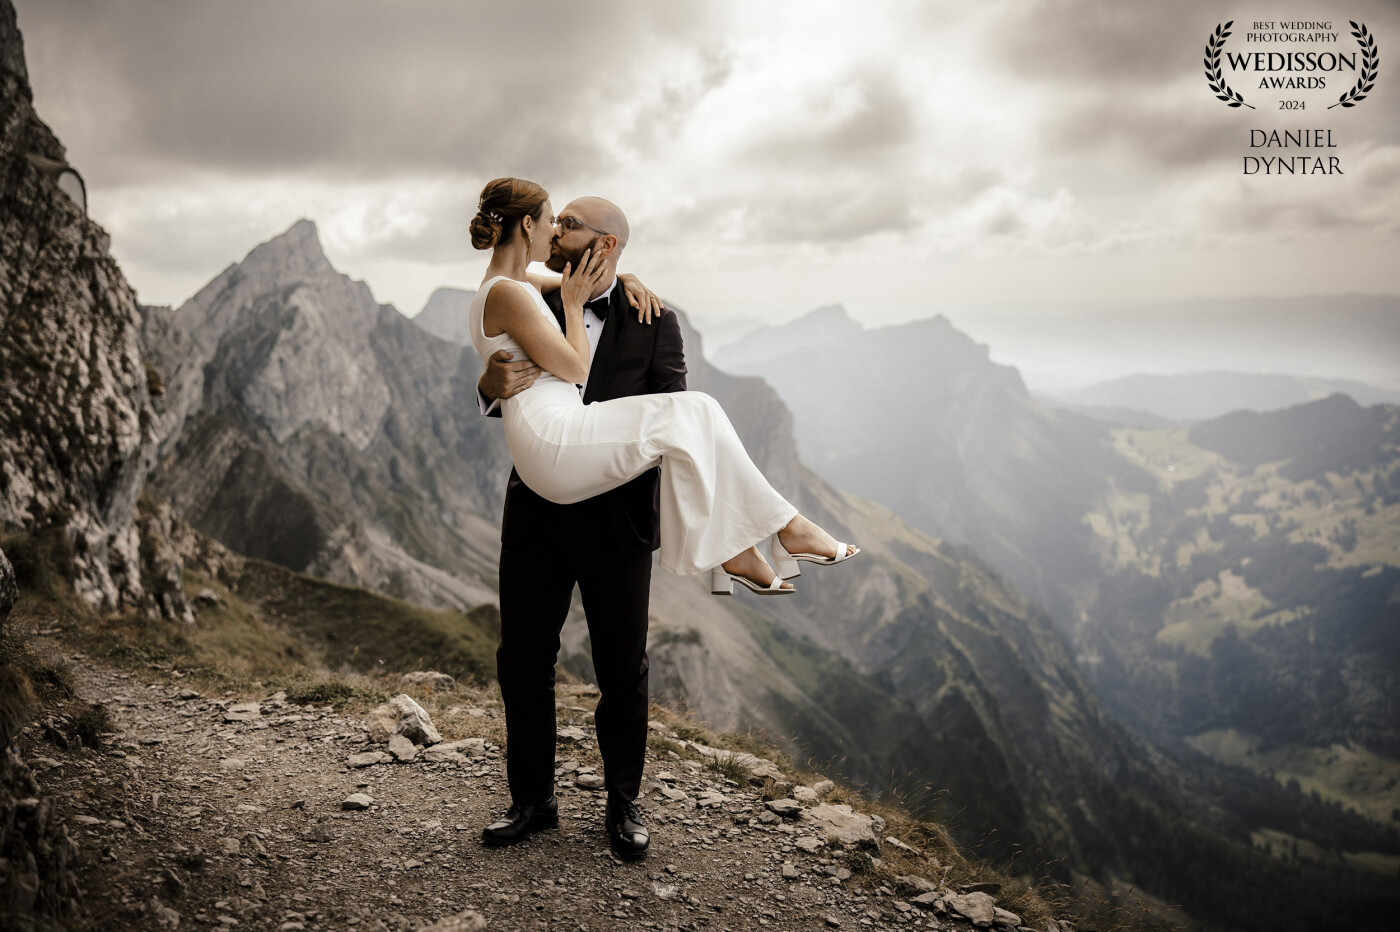 This was such an epic wedding shoot at mount pilatus near lucerne (Switzerland). The couple was from Washington and it was a pleasure to shoot with this two 🤍. The weather was Beautiful too with such me clouds. I really like it when it’s cloudy it is somehow more interesting then a boring blue sky ☺️.